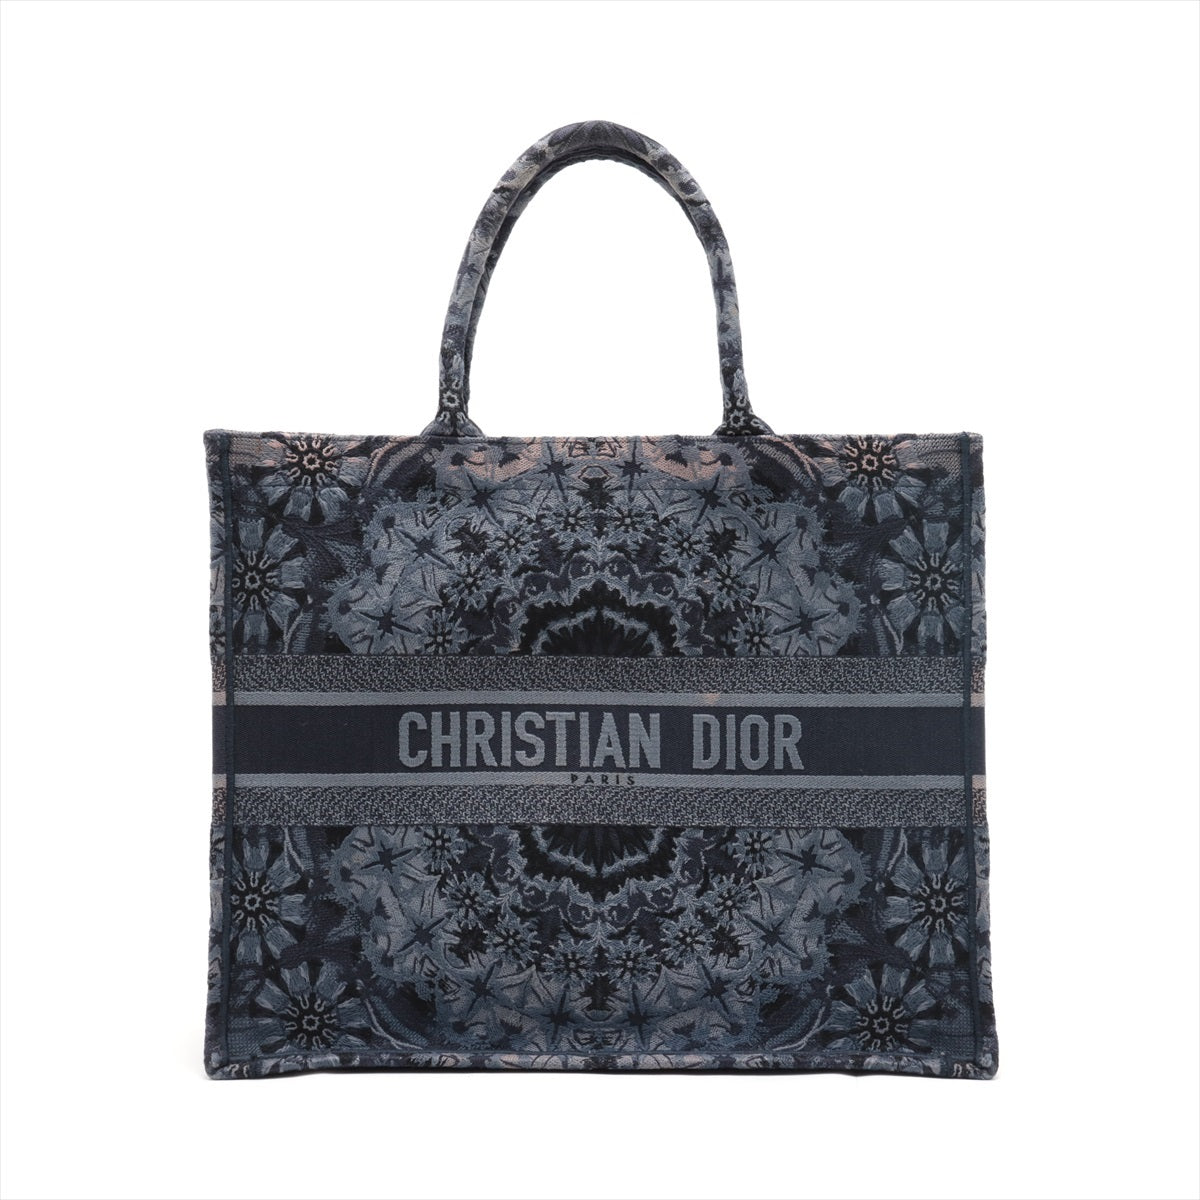 Christian Dior Book Tote Large canvas Tote bag Navy blue